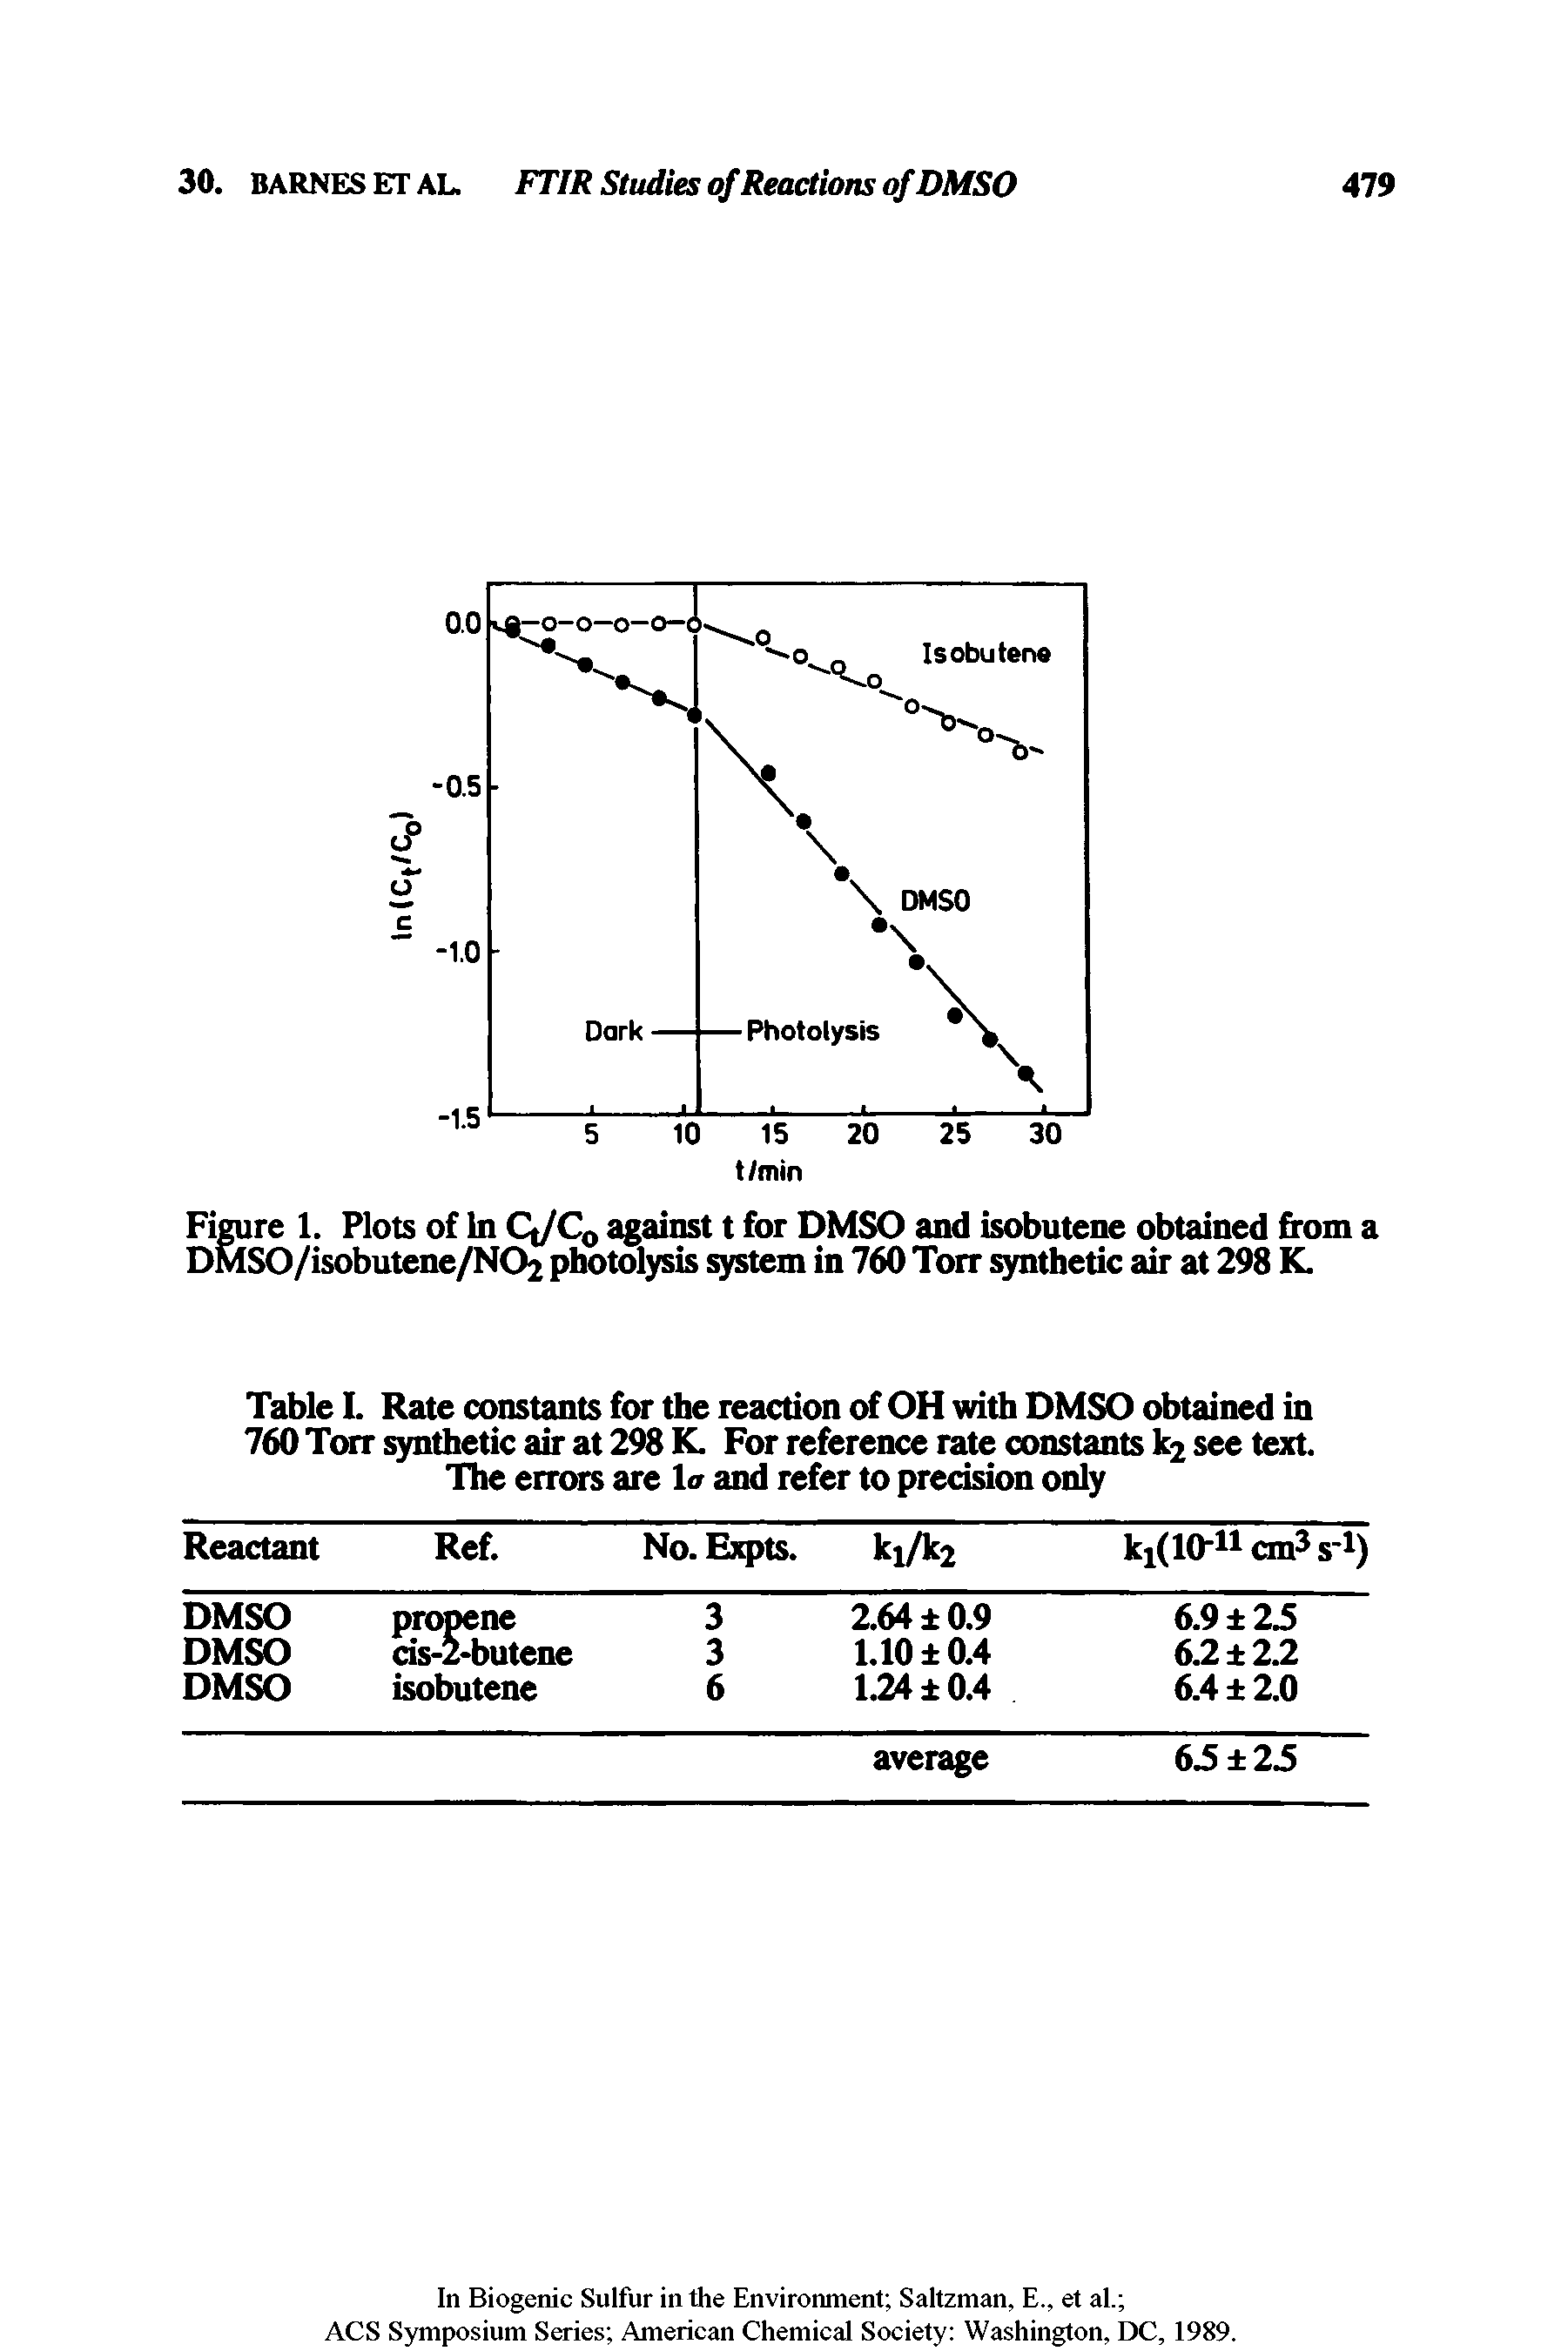 Figure 1. Plots of In CJC0 against t for DMSO and isobutene obtained from a DMSO/isobutene/N02 photolysis system in 760 Torr synthetic air at 298 K.